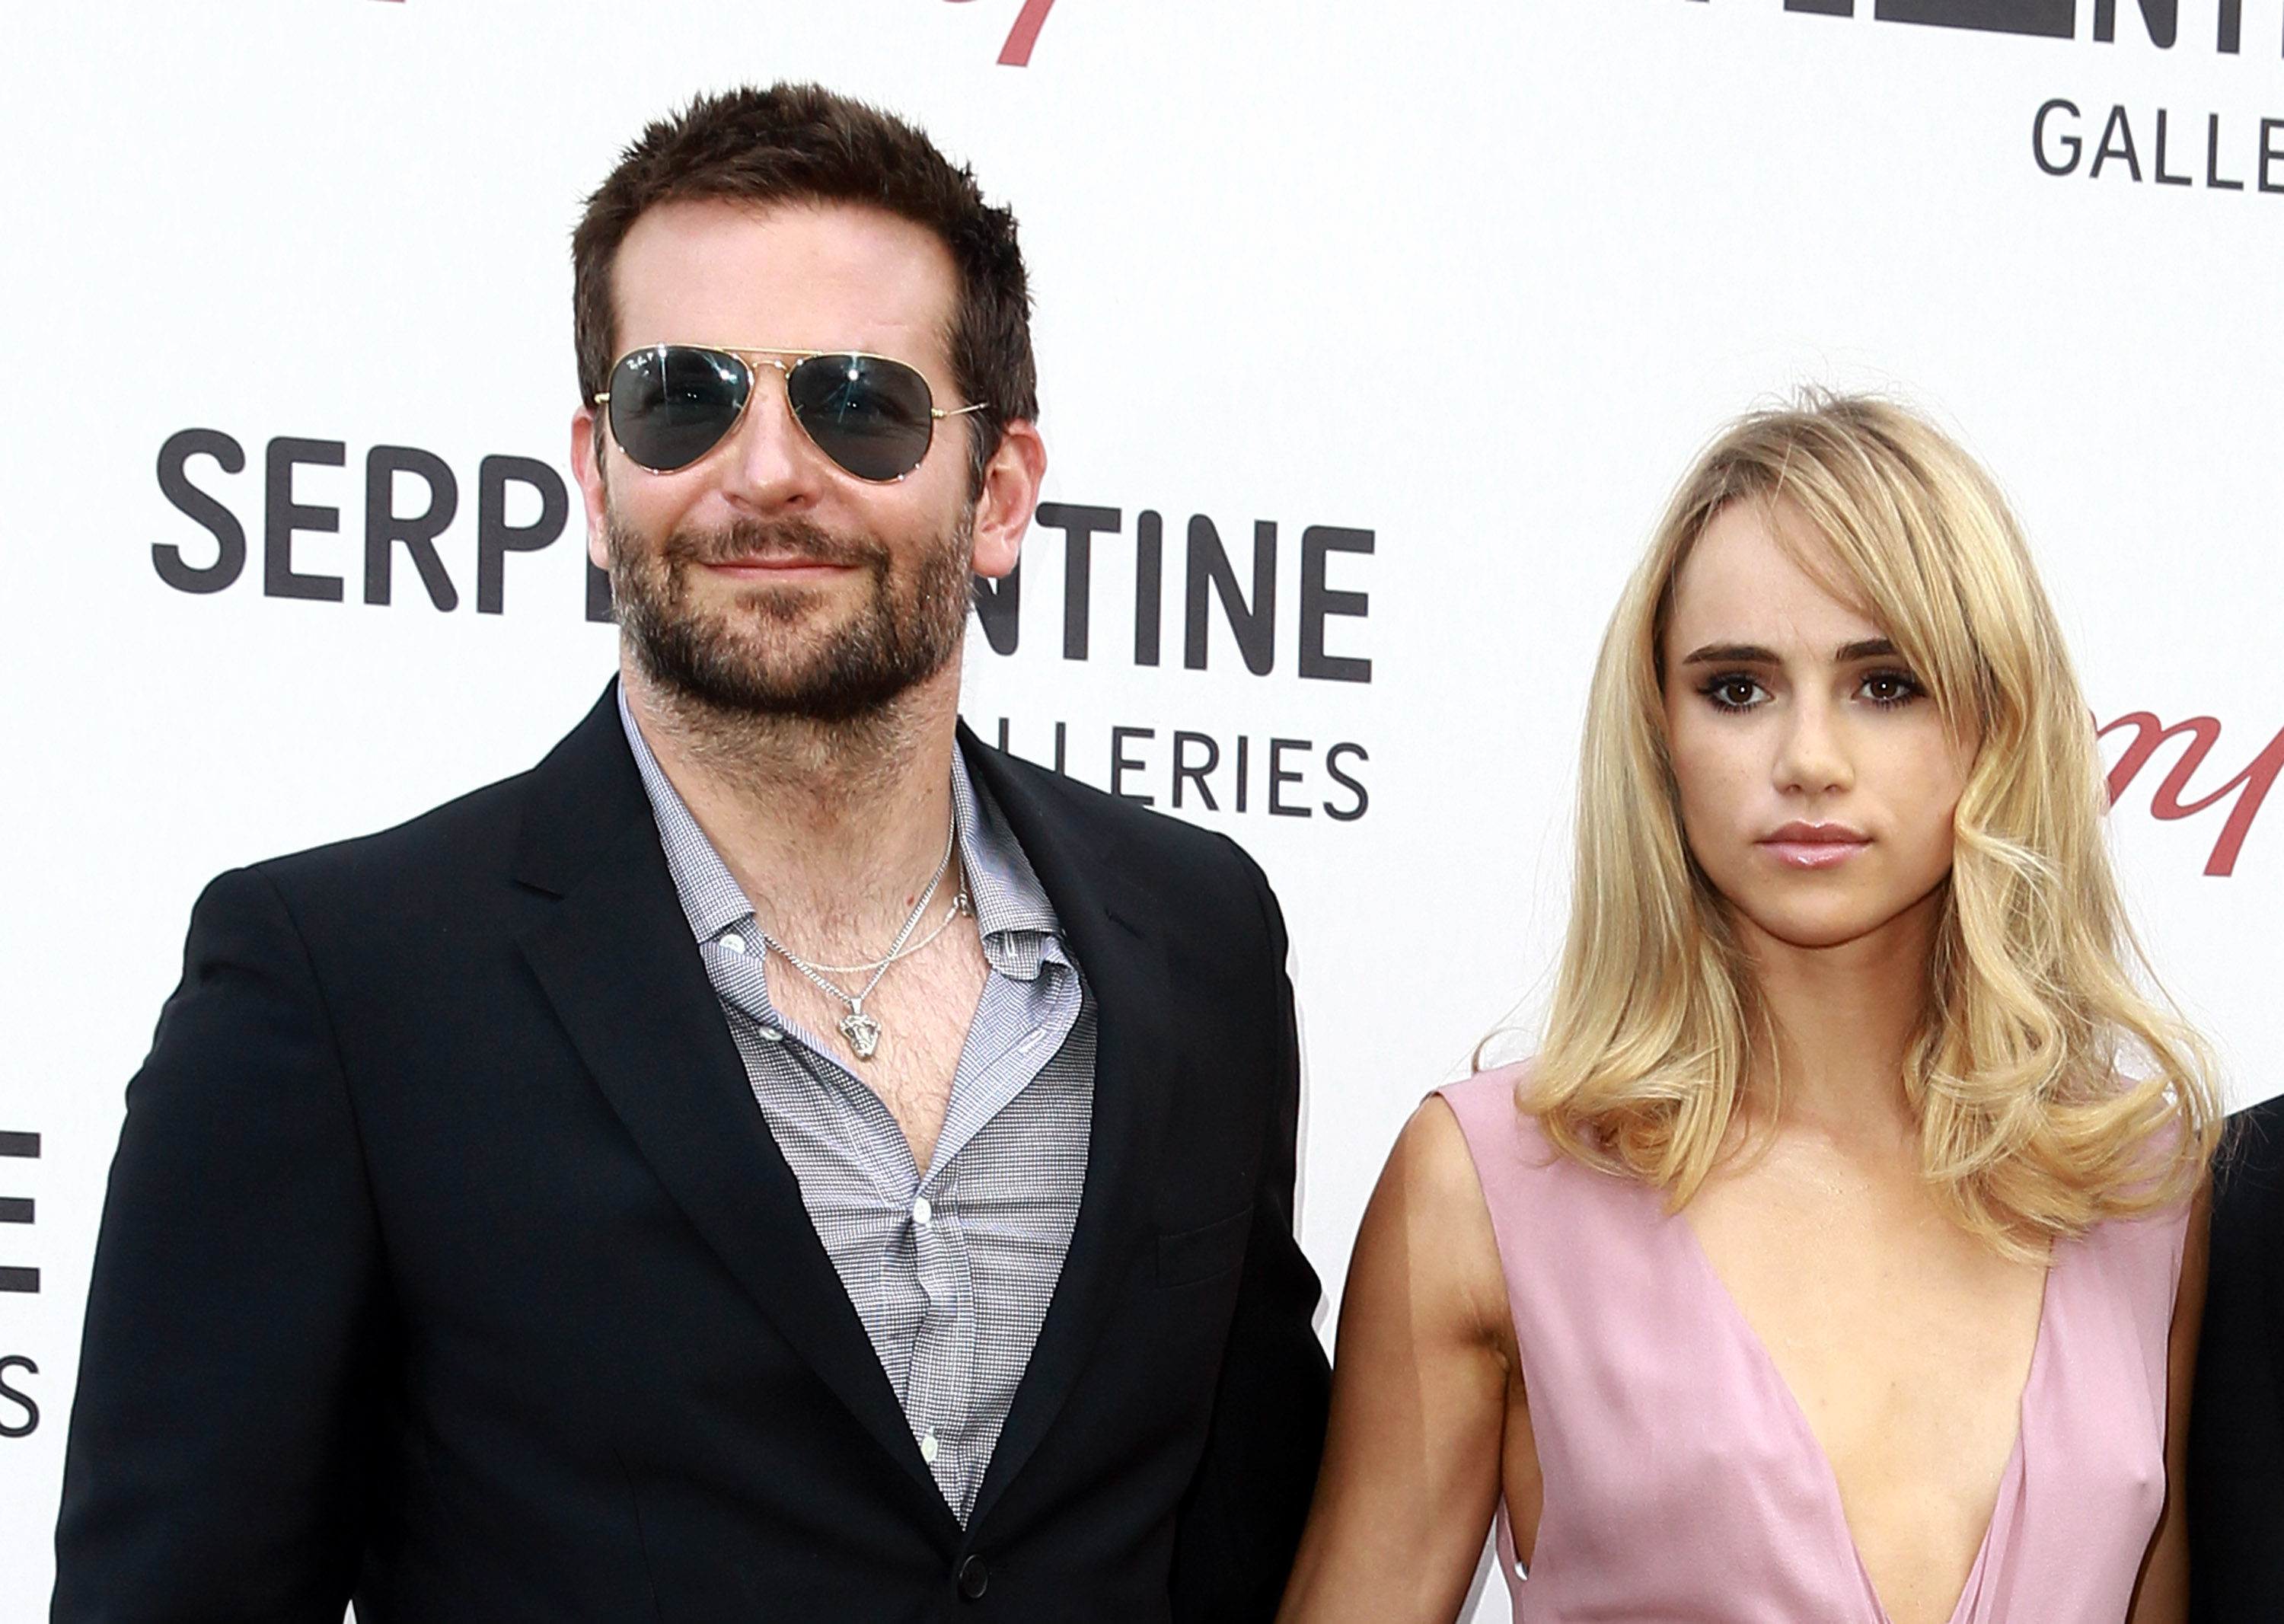 Bradley Cooper and Suki Waterhouse summer party on July 1, 2014 in London, England. (Fred Duval—FilmMagic)